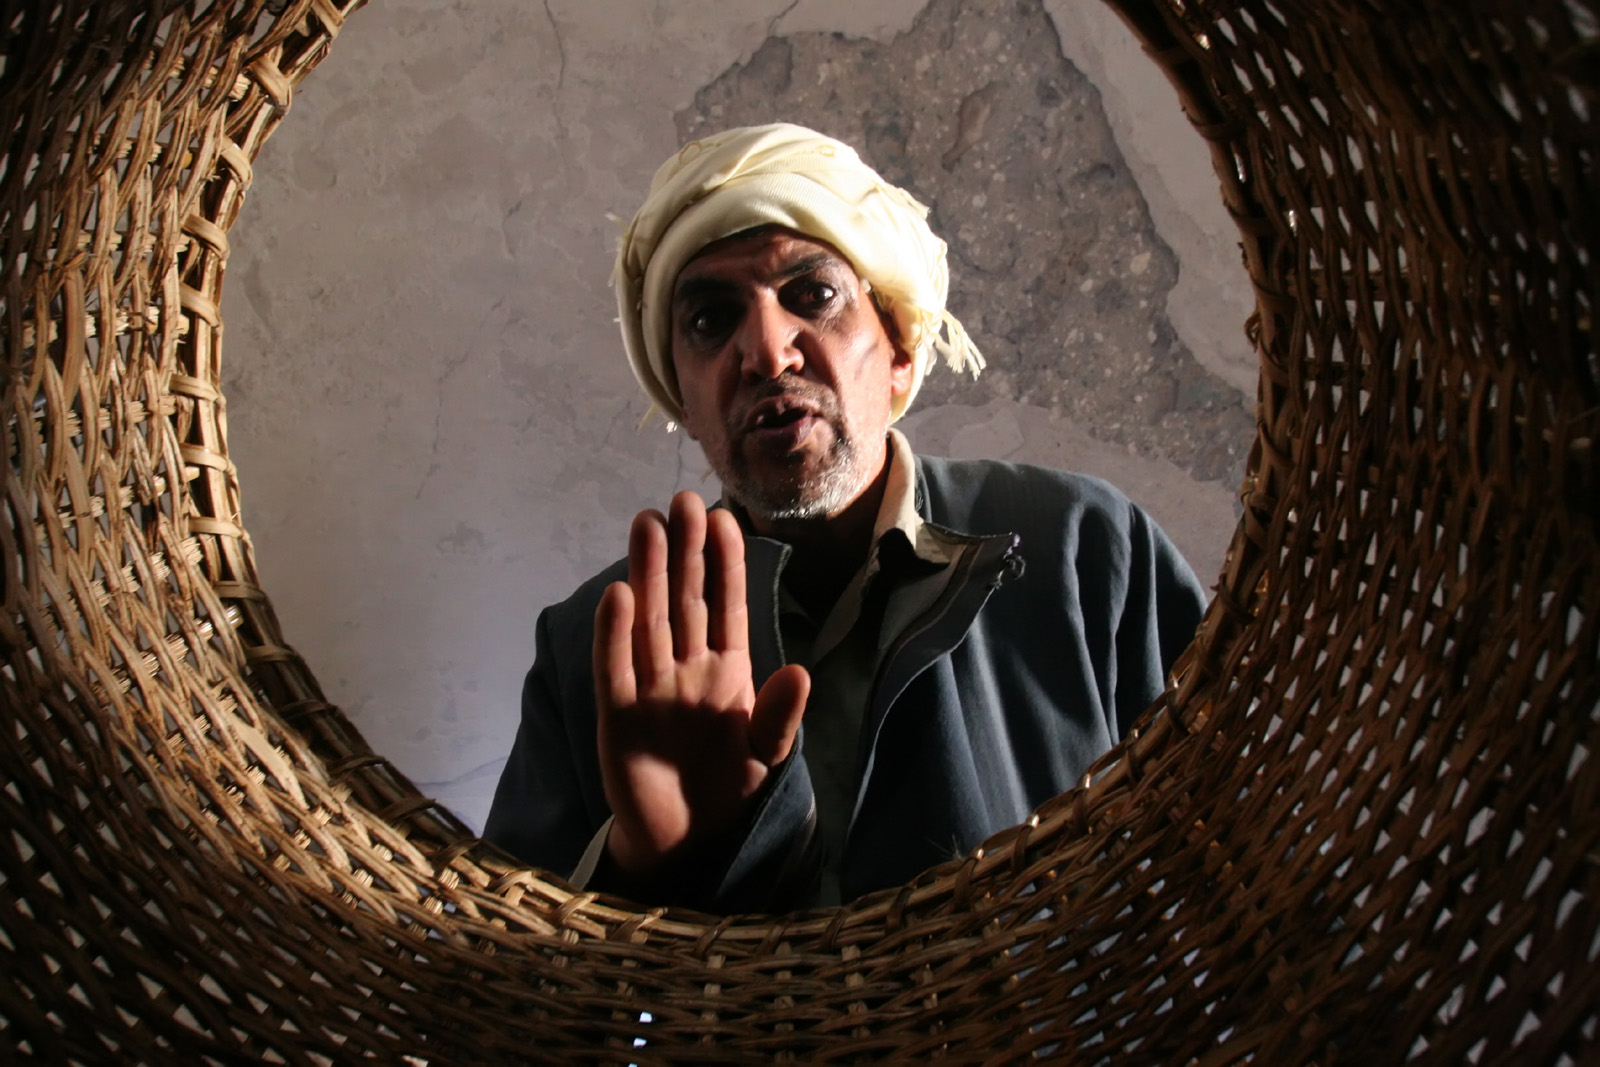 Man wearing a Turban looks down at the camera that is in a woven basket